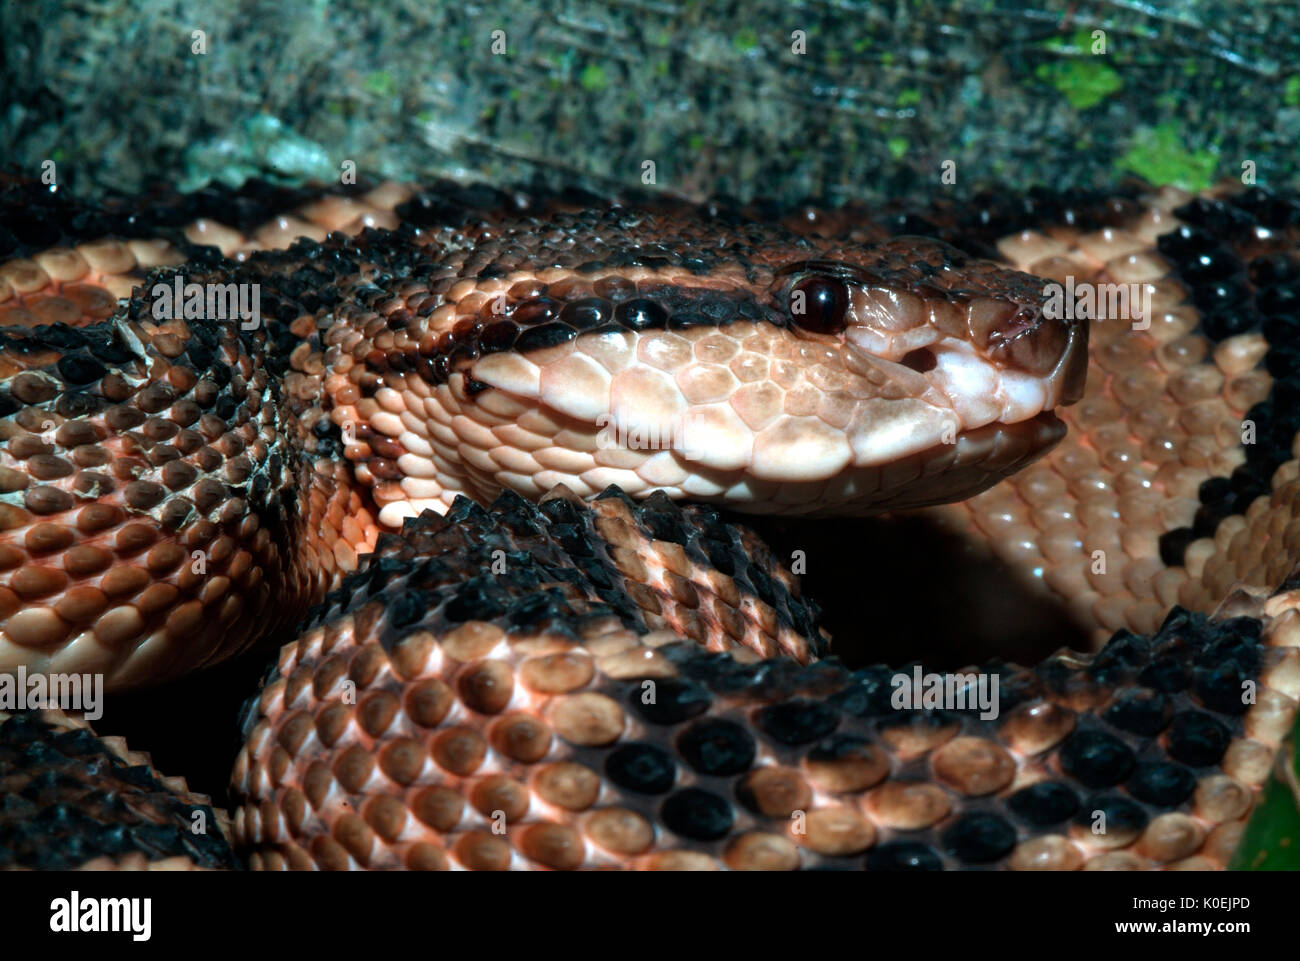 Bushmaster, Lachesis muta stenophrys, Central and South America, jungle, poisonous, venemous, Stock Photo